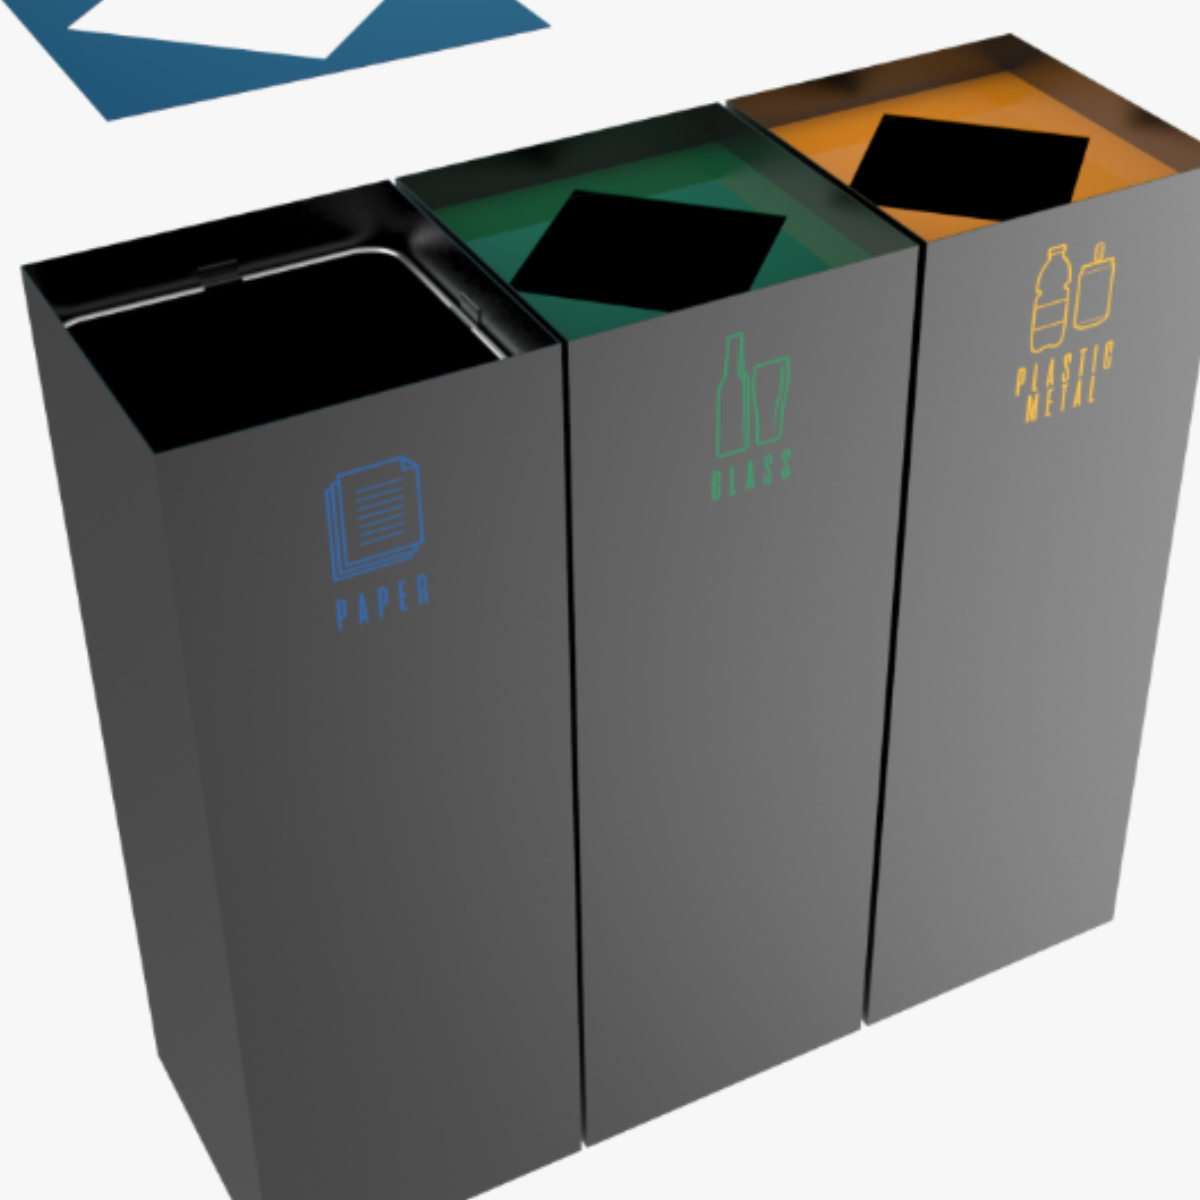 AB-791 3'Part Recycle Bin